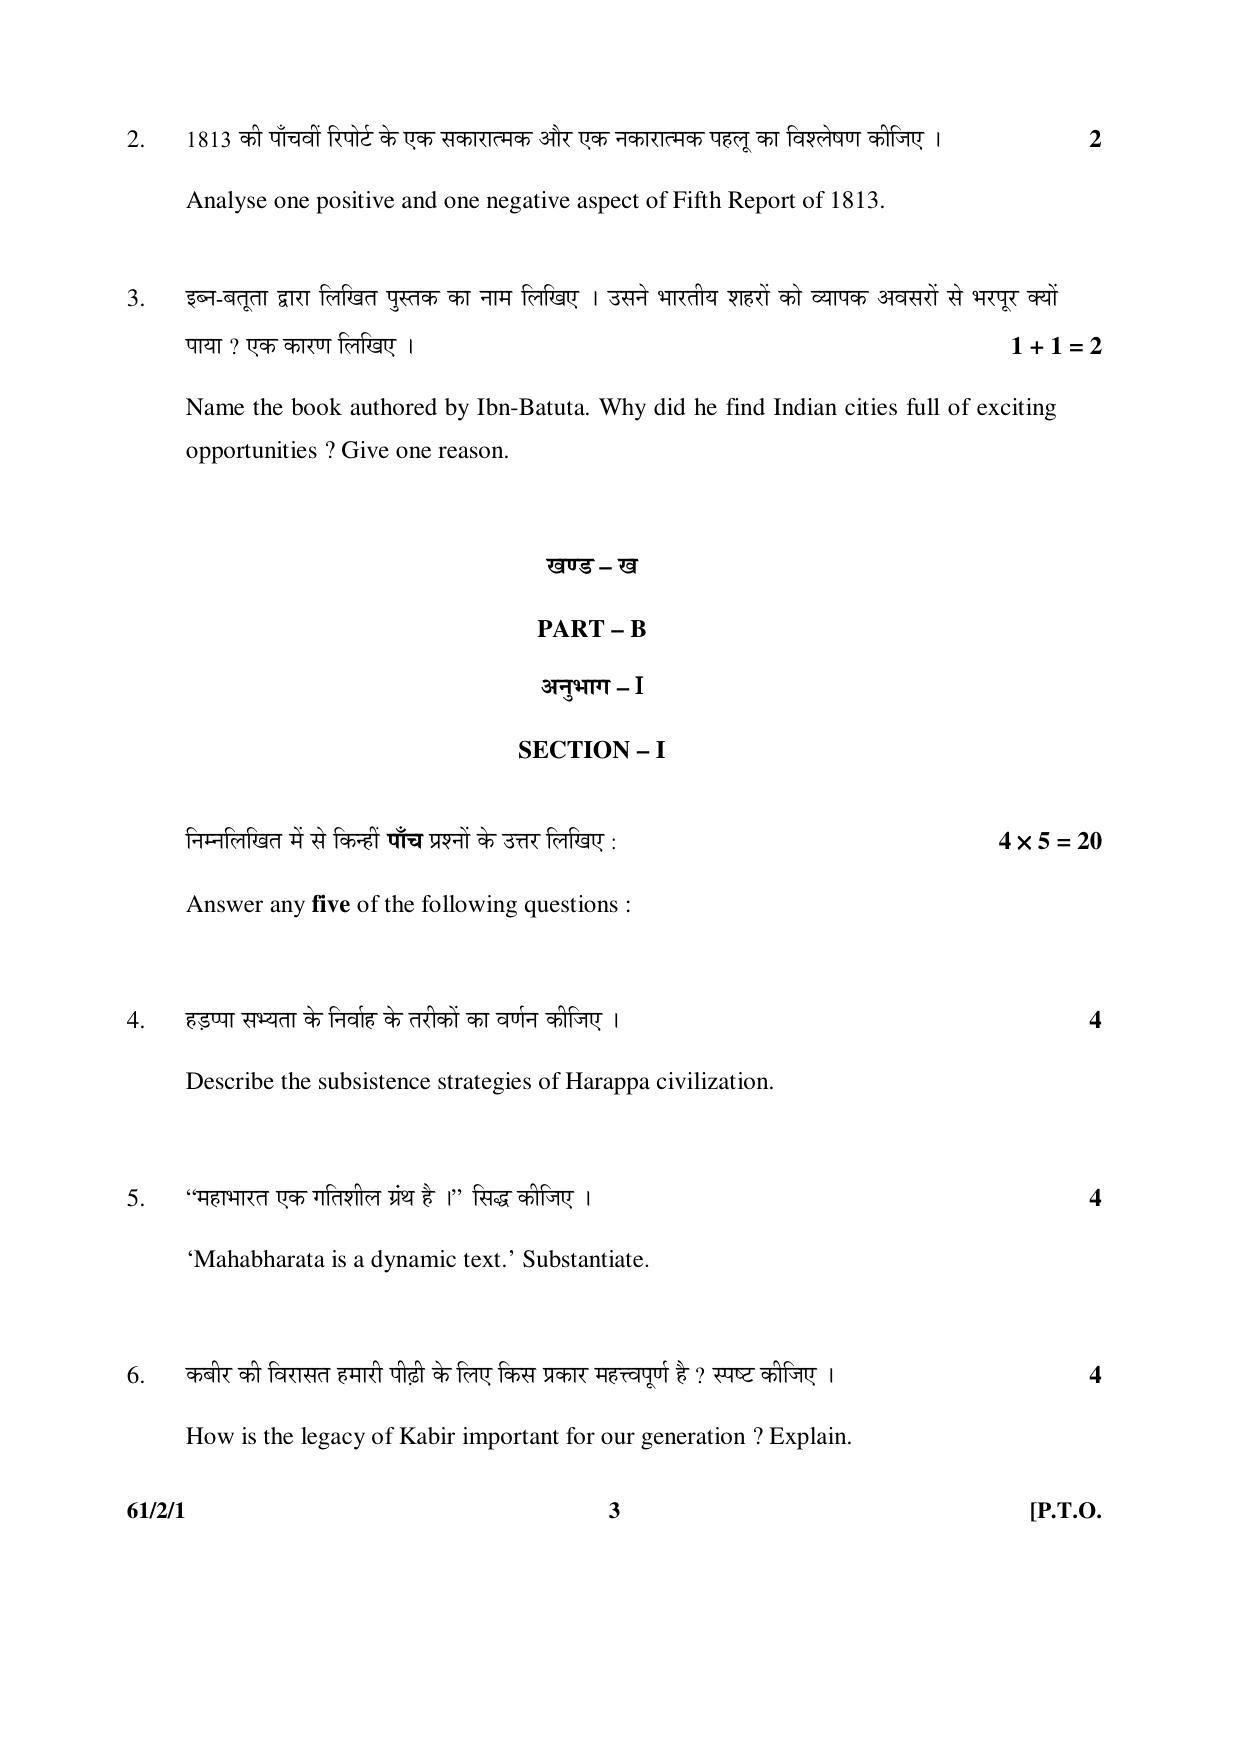 CBSE Class 12 61-2-1 History 2016 Question Paper - Page 3